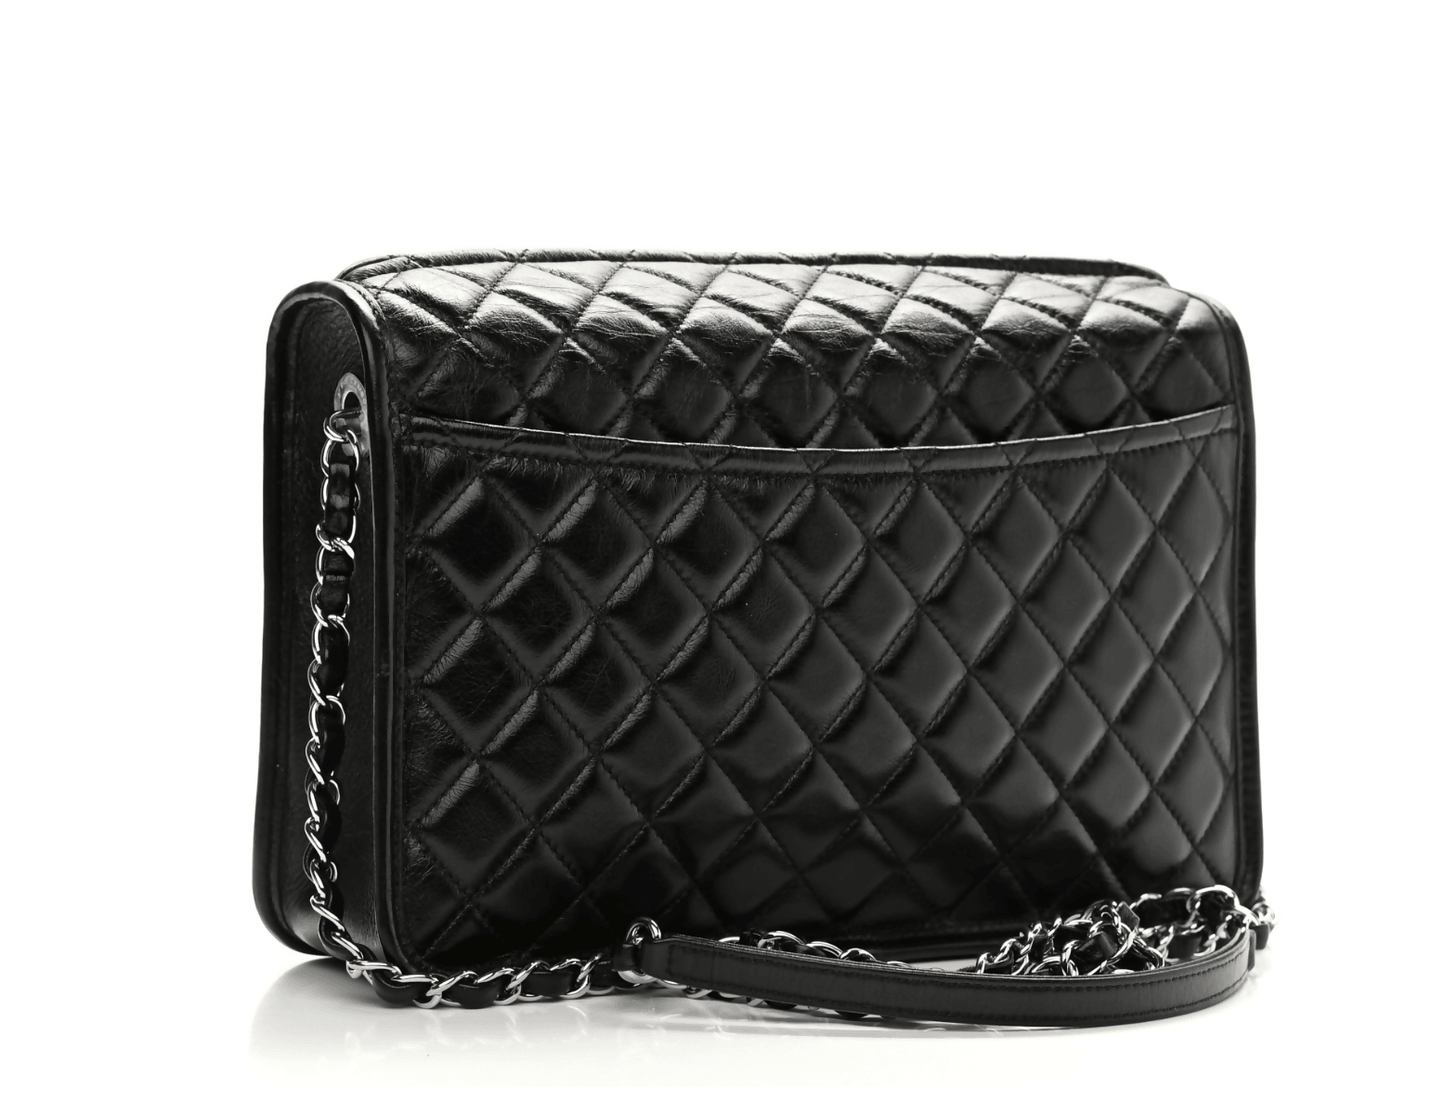 Quilted Working Camera Case Handbag - Endless